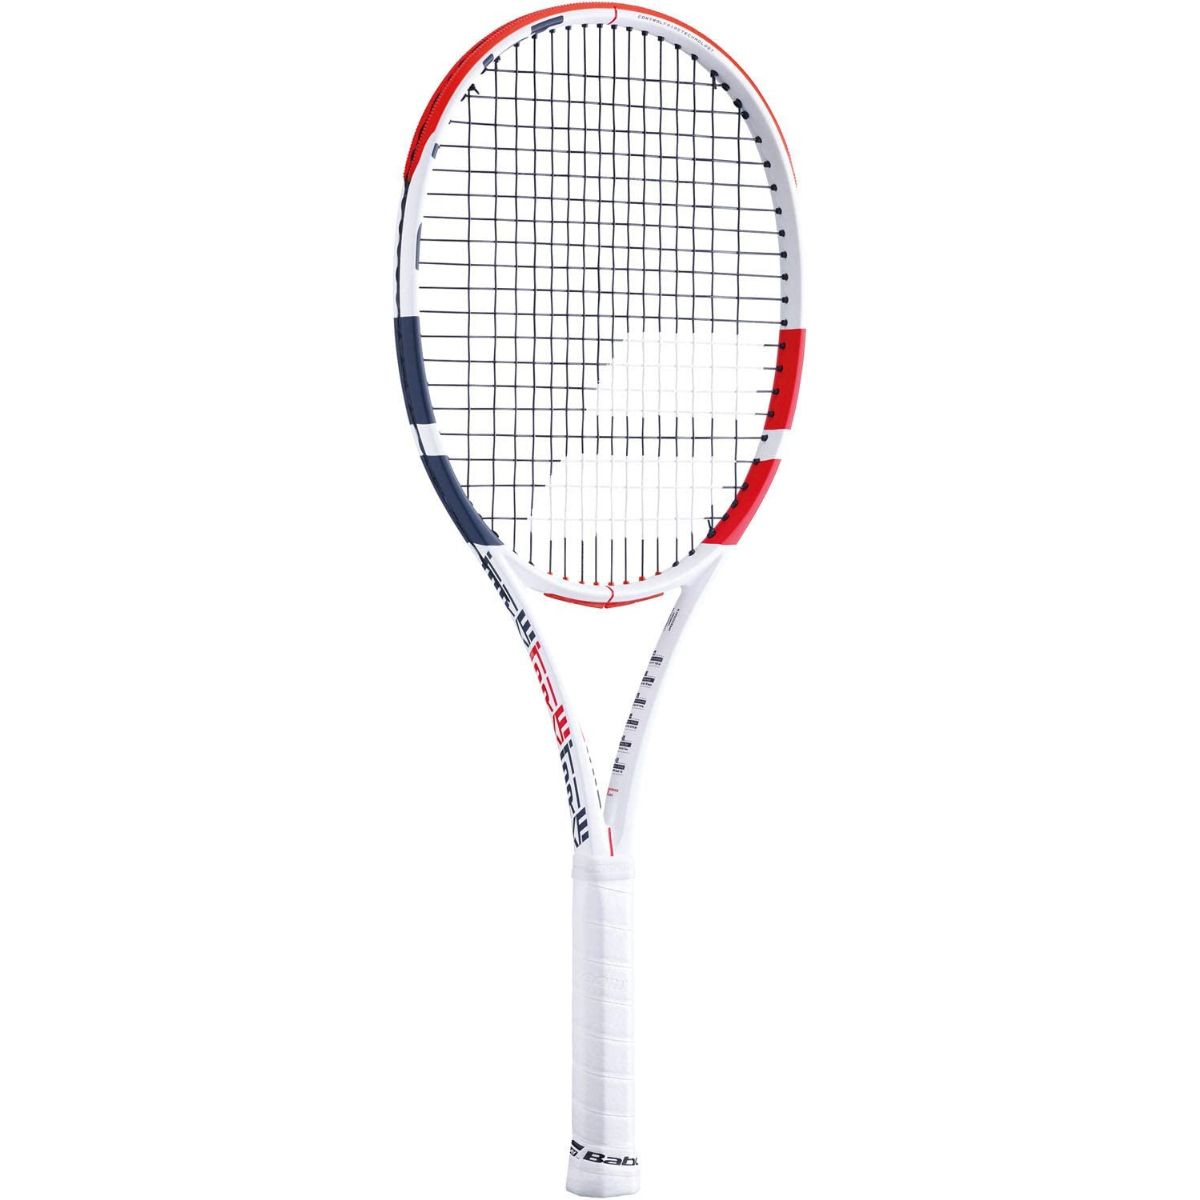 The Best Tennis Rackets for Control Options: Babolat Pure Strike 16×19